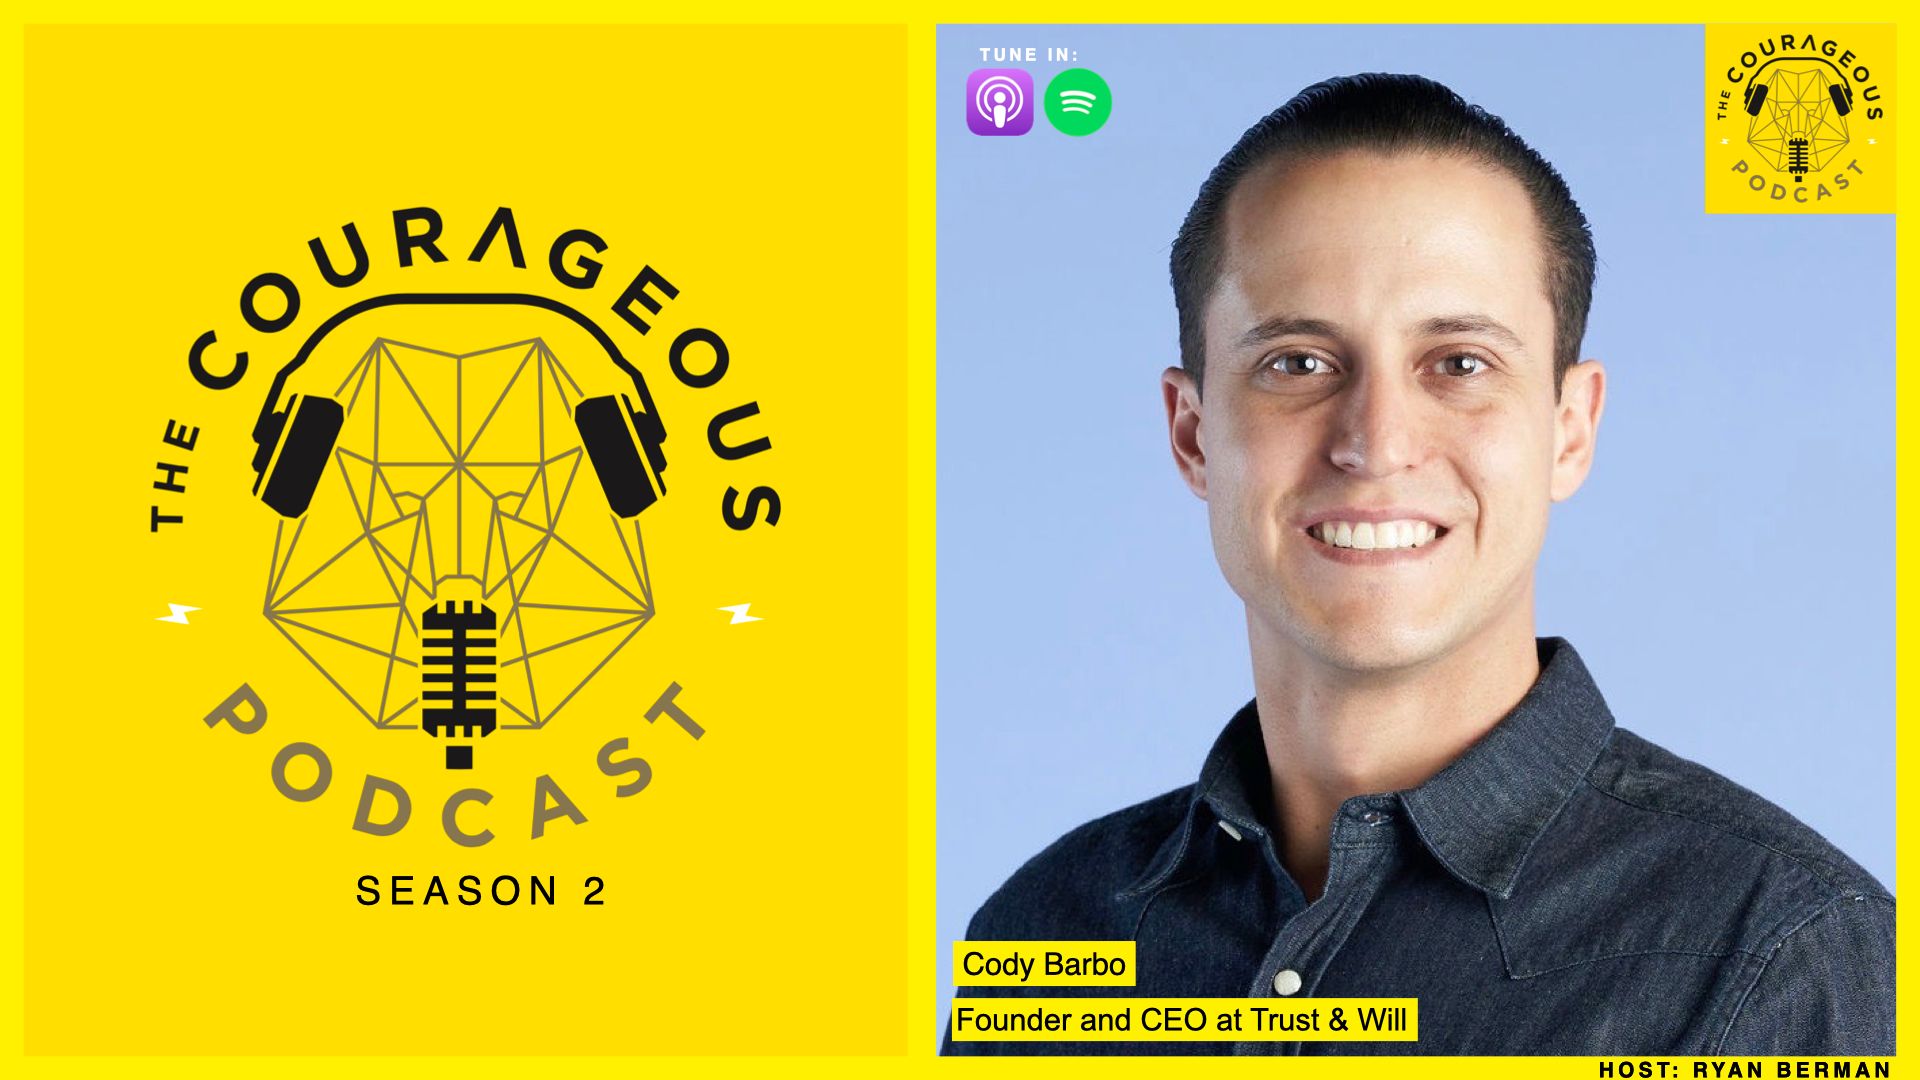 EP122 Cody Barbo - Founder and CEO at Trust & Will